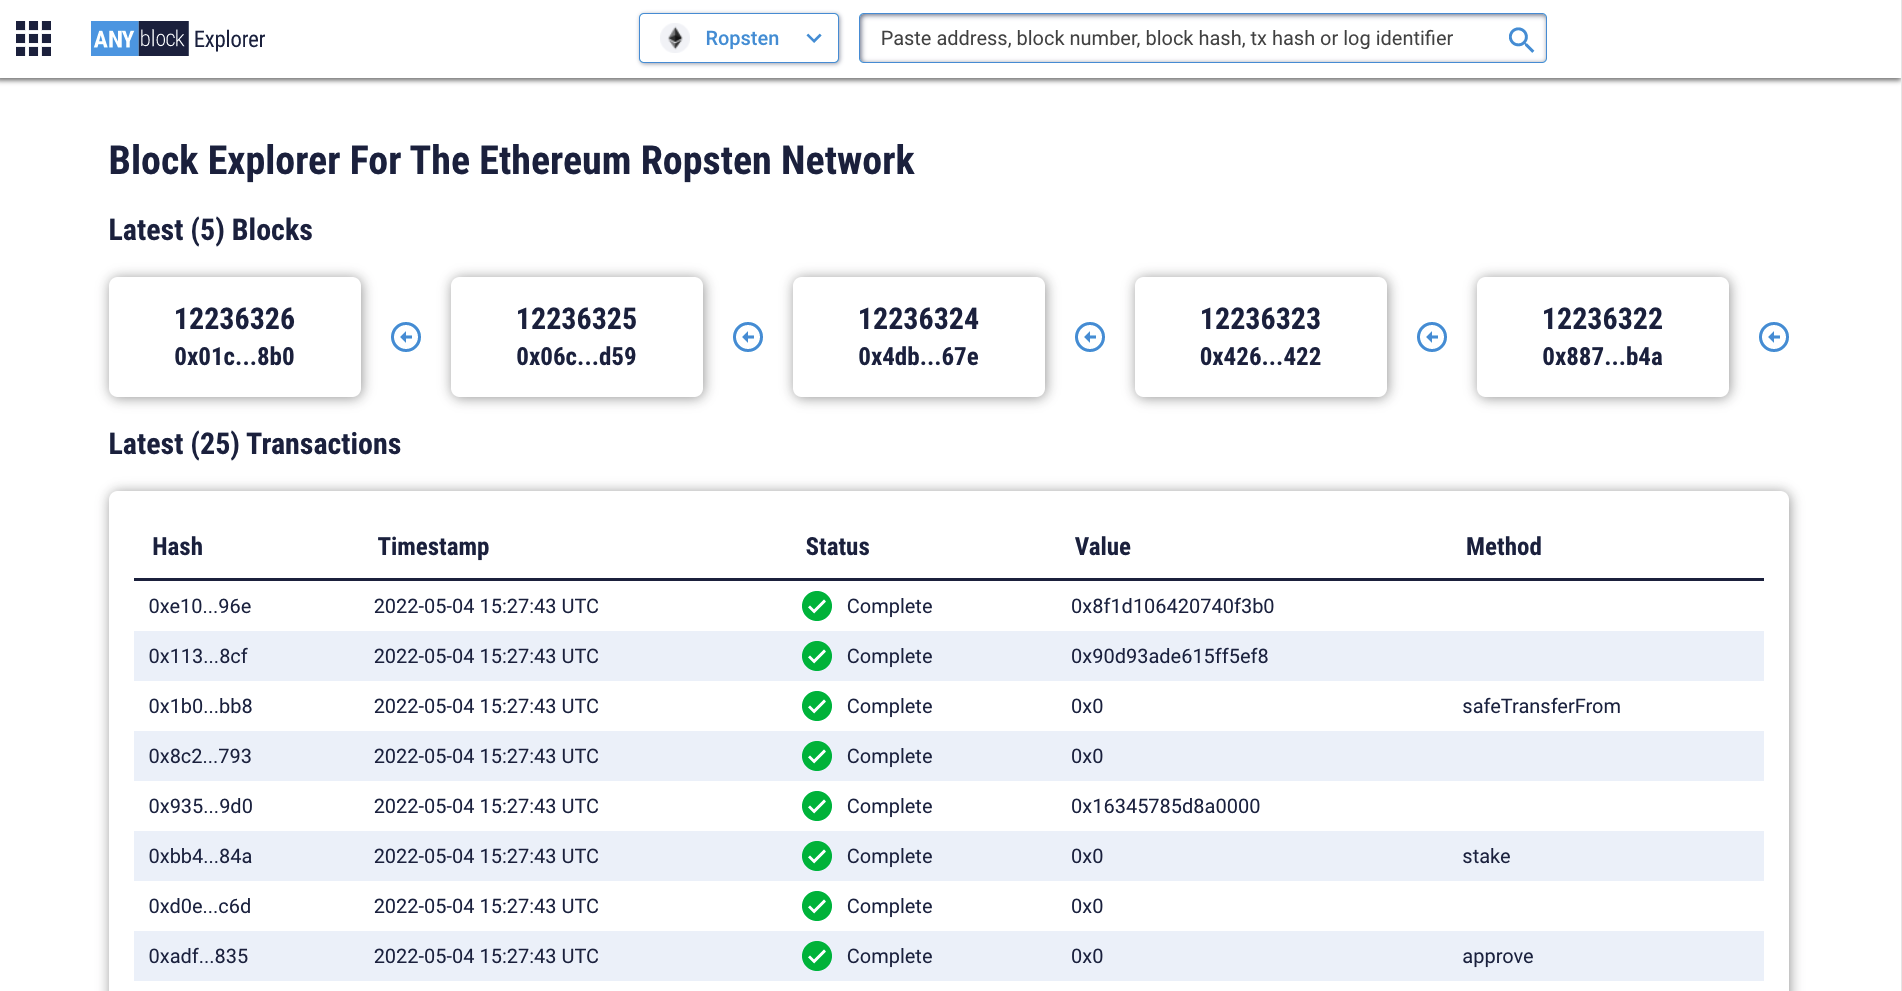 The Anyblock Explorer shows the latest 25 transactions on the Ropsten Test Network